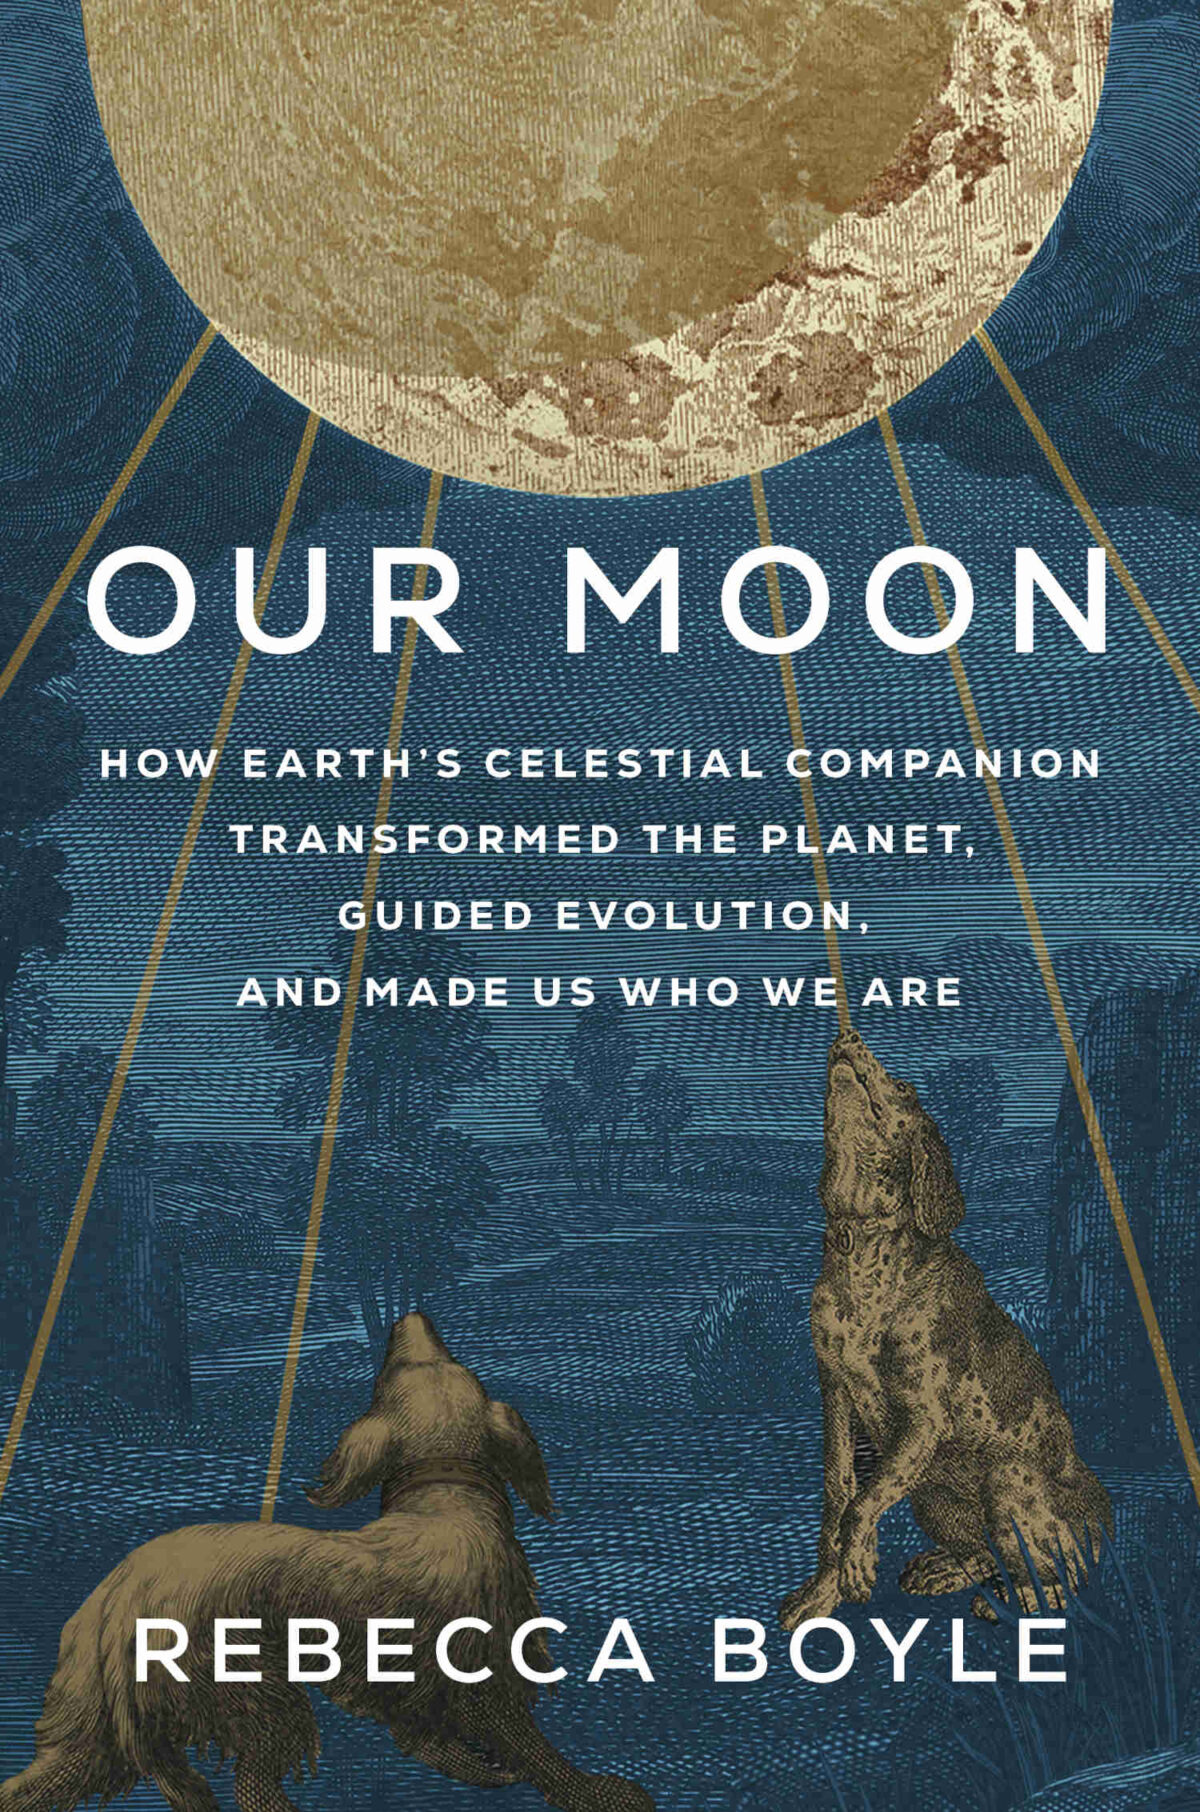 Our-Moon-book-cover